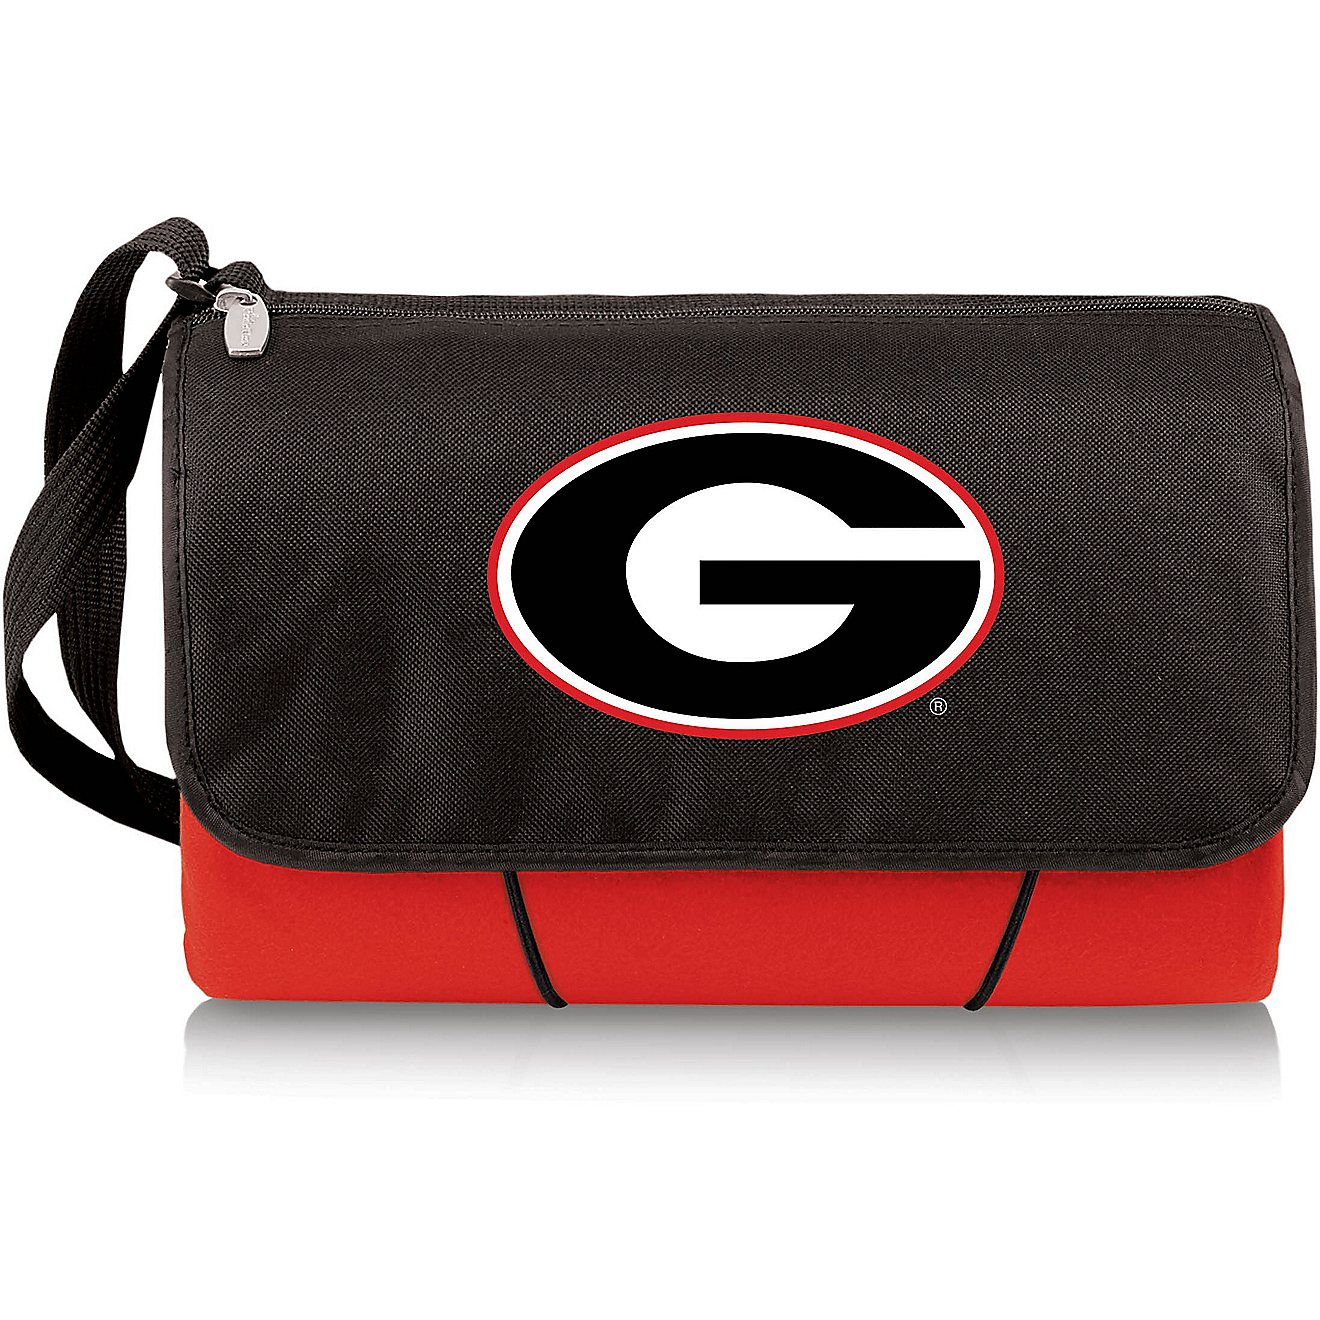 Picnic Time University of Georgia Blanket Tote                                                                                   - view number 1